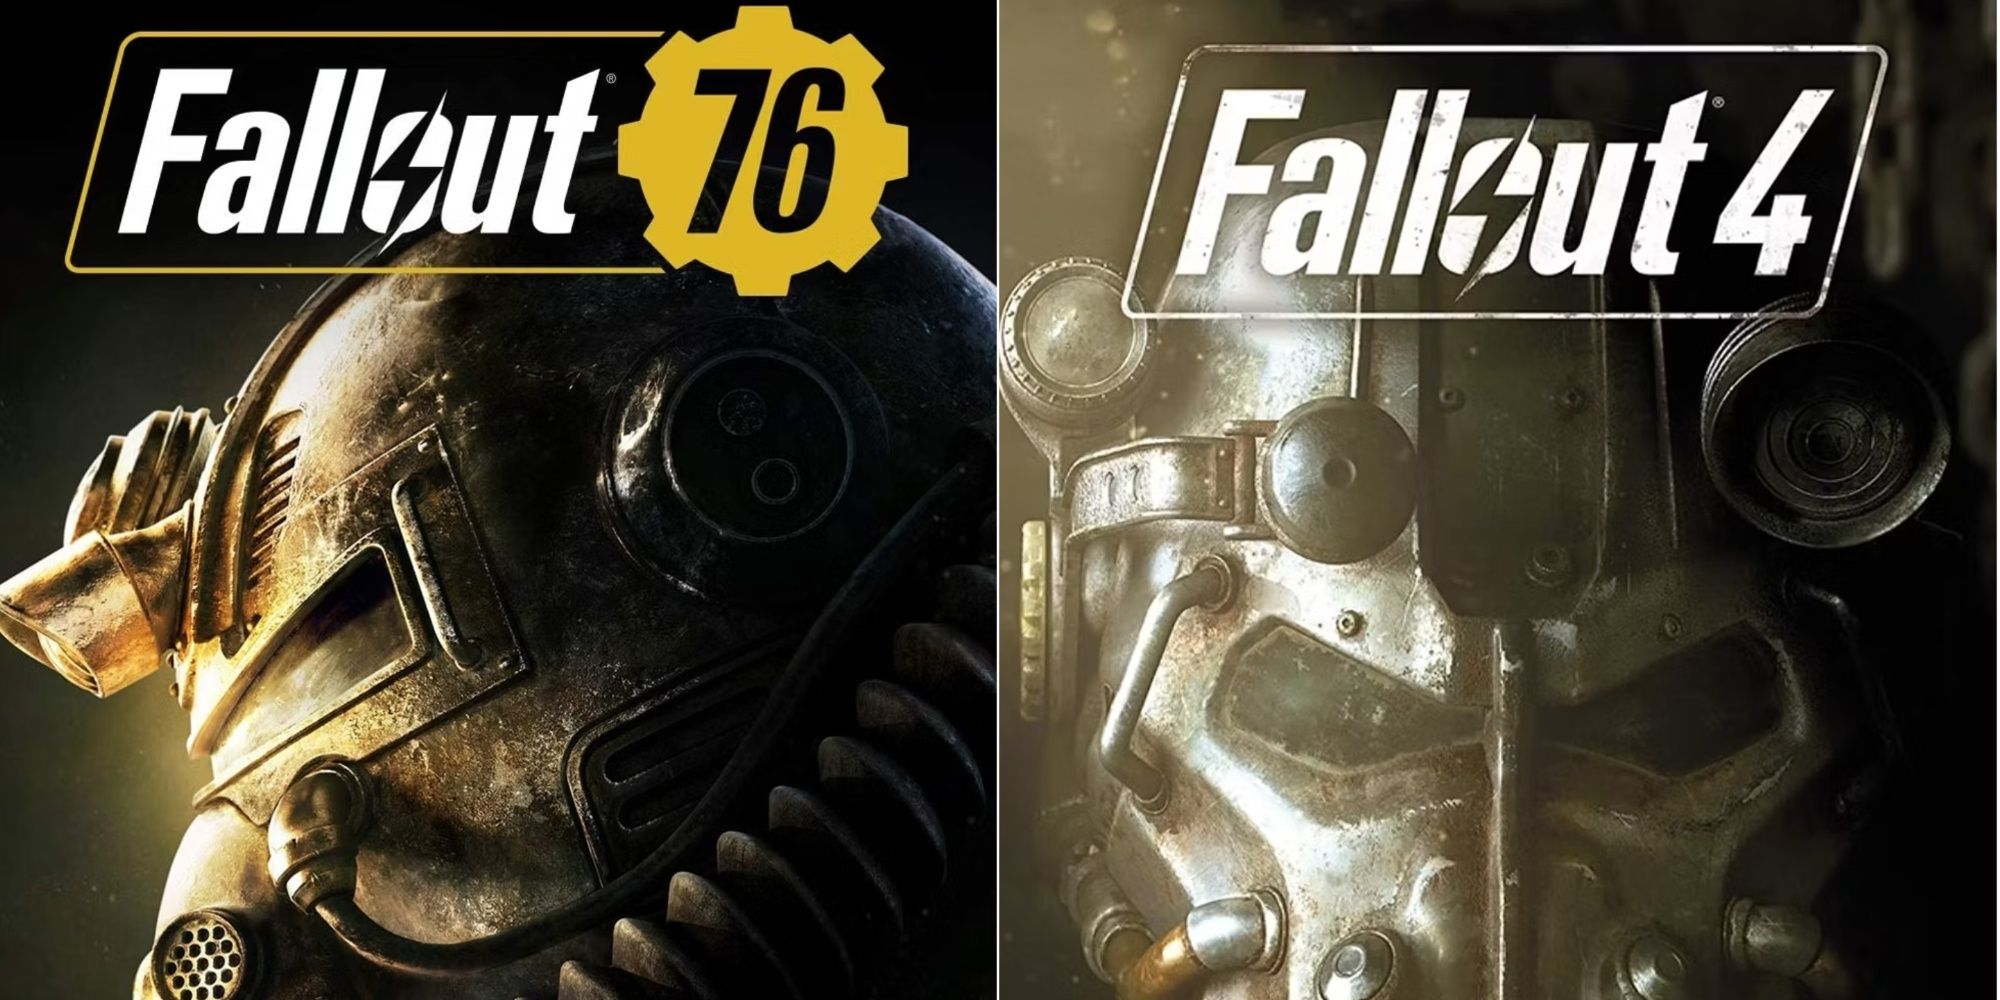 Fallout 4 And Fallout 76 Game Covers